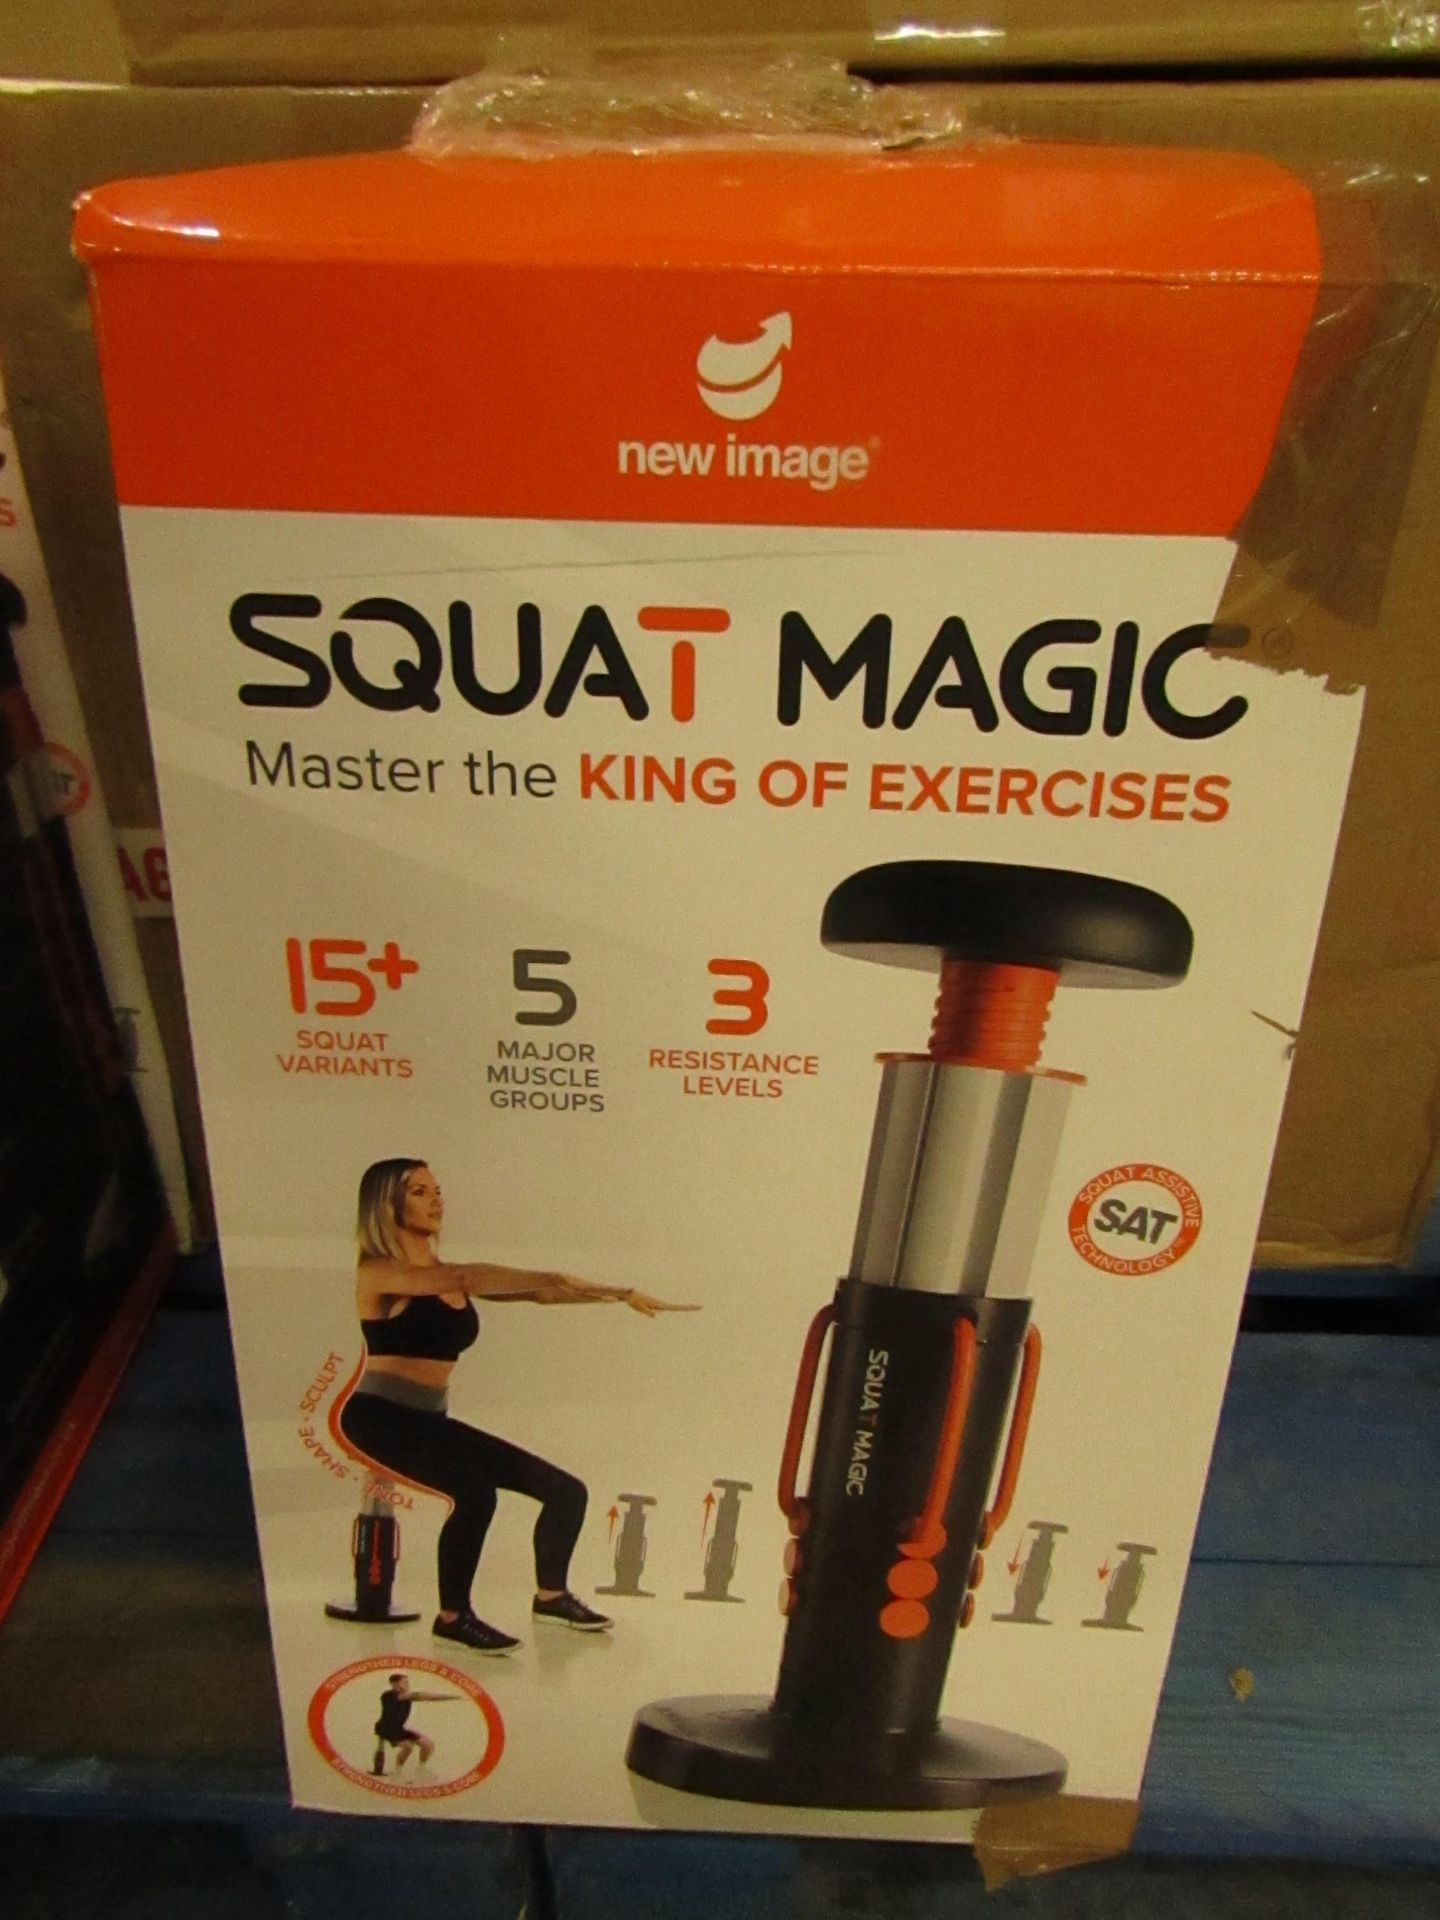 |1X | NEW IMAGE SQUART MAGIC | NO ONLINE RESALE | SKU - | RRP £59.99 BOXED- UNCHECKED |